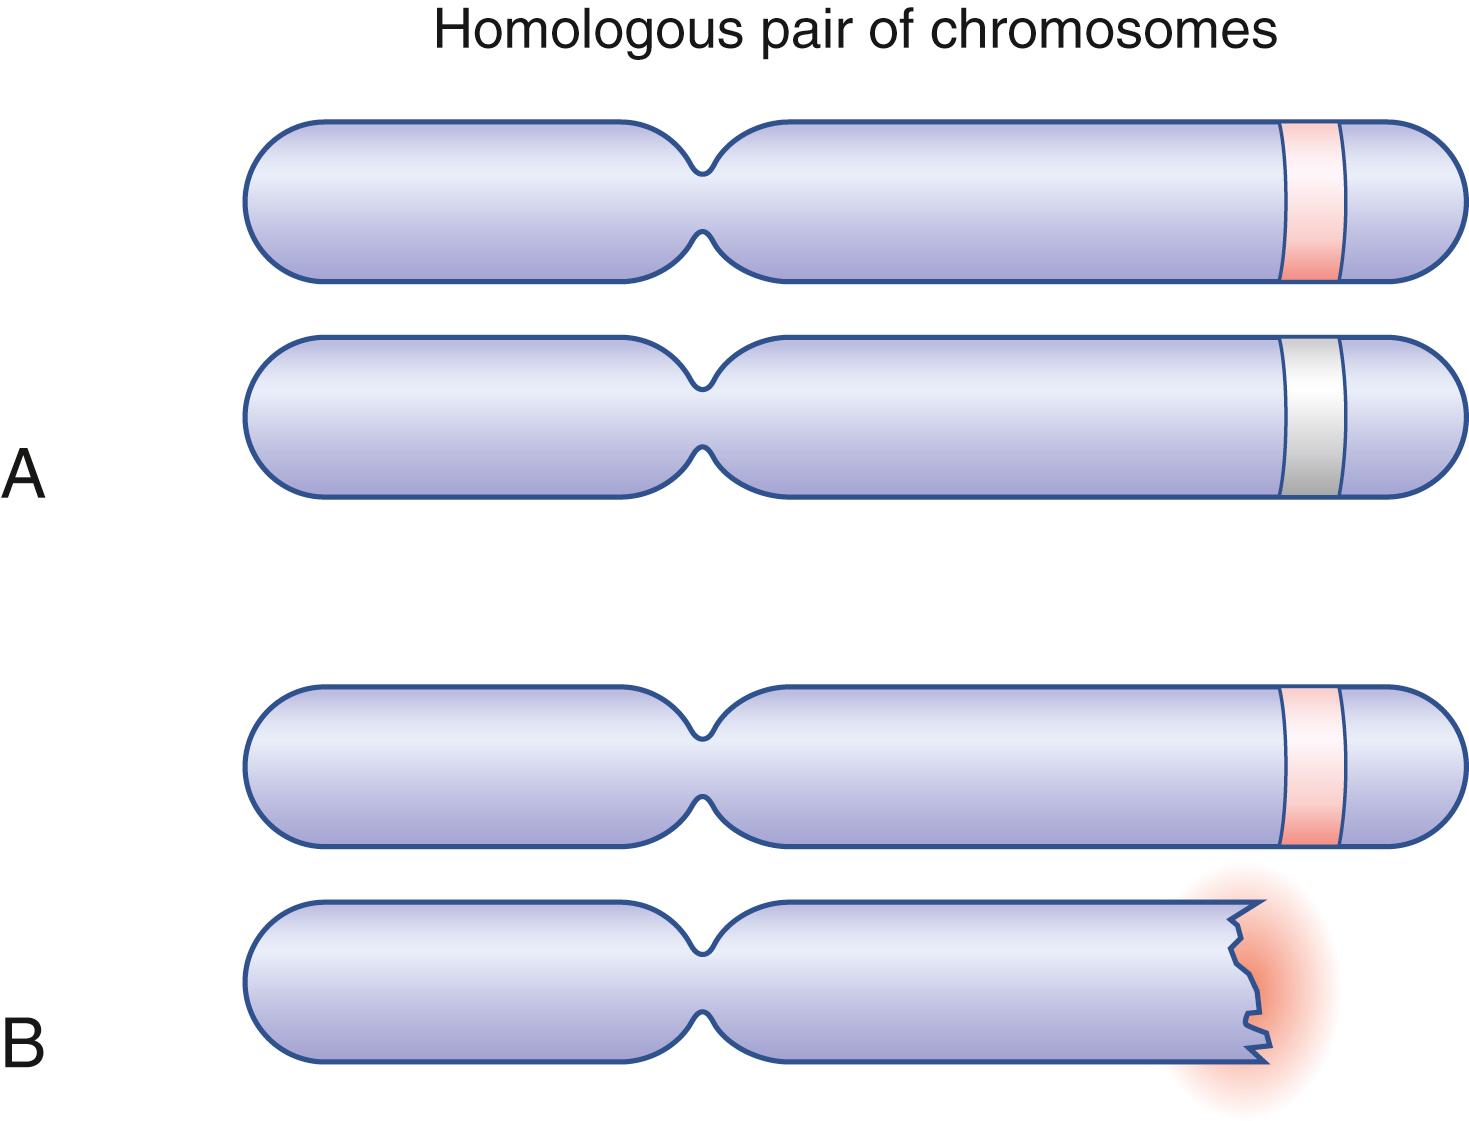 Fig. 41.1, Illustration of somatic mutation leading to loss of function of the menin gene in heterozygous individuals. (A) Normal allele. (B) Somatic mutation affects normal allele.